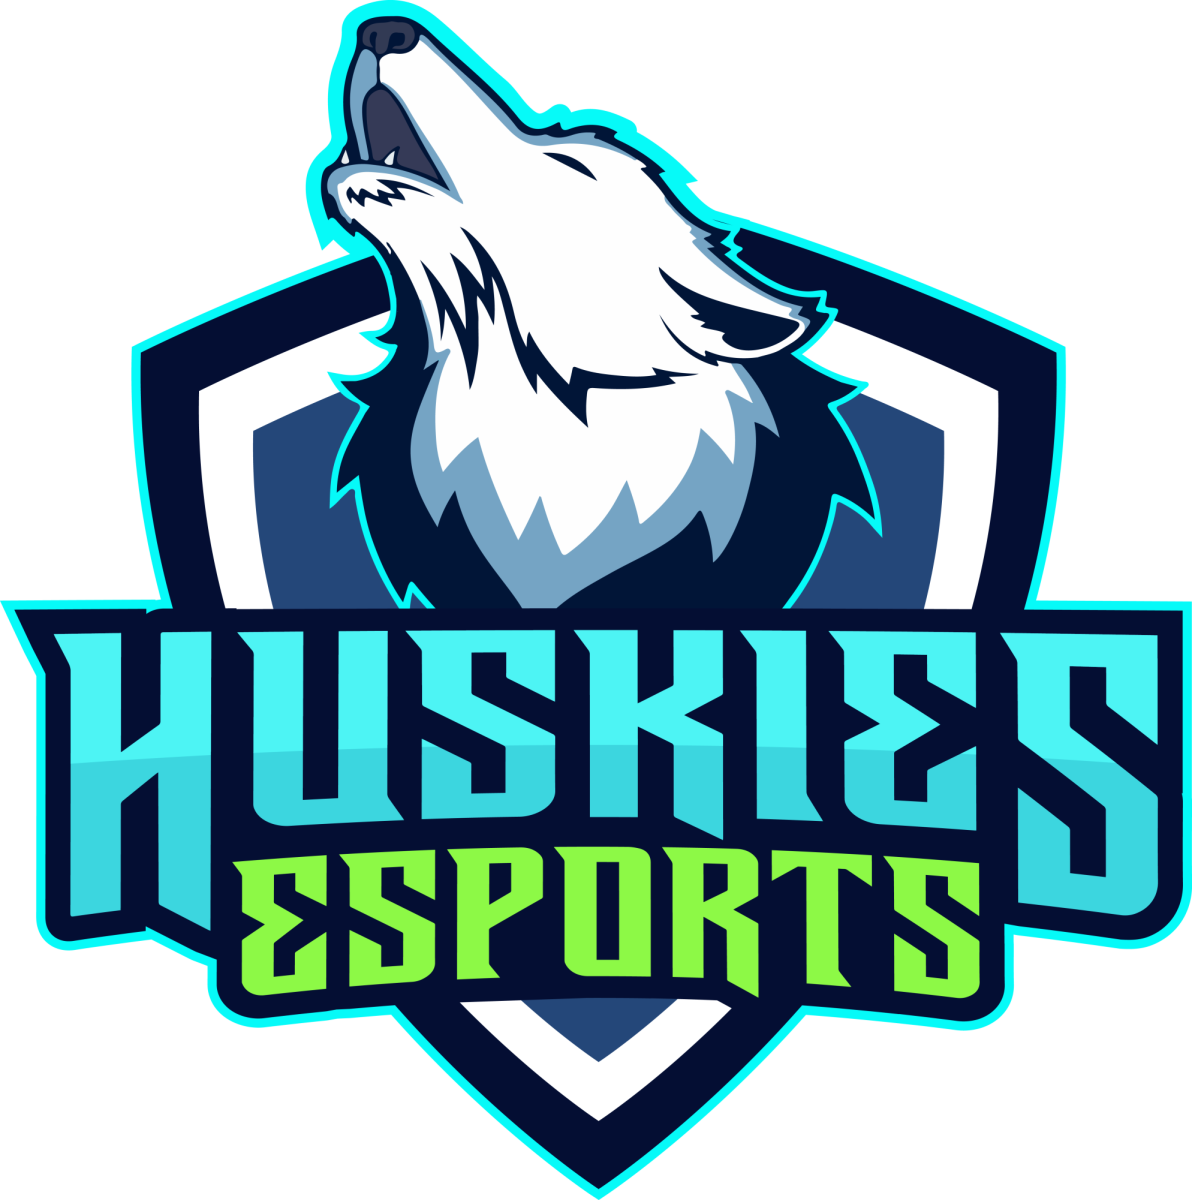 Huskys+ESPORTS+team+gives+students+a+chance+to+show+off+their+skills